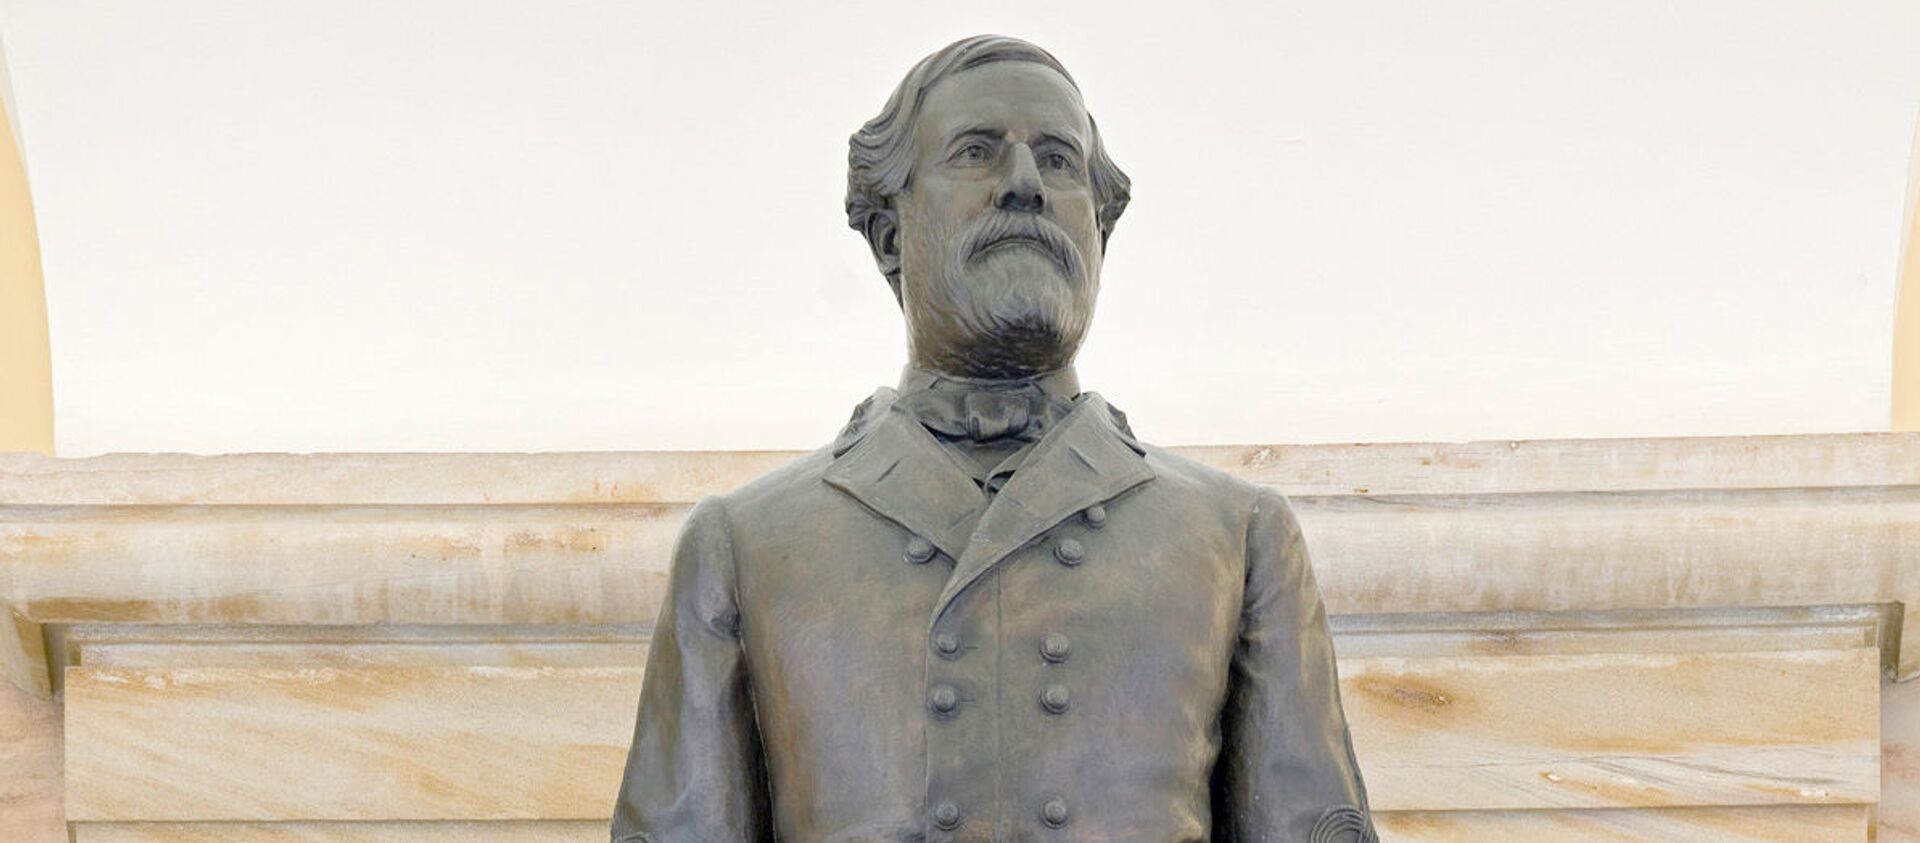 According to the Architect of the Capitol, this statue of Robert E. Lee was given to the National Statuary Hall Collectionby Virginia in 1909  - Sputnik International, 1920, 21.12.2020